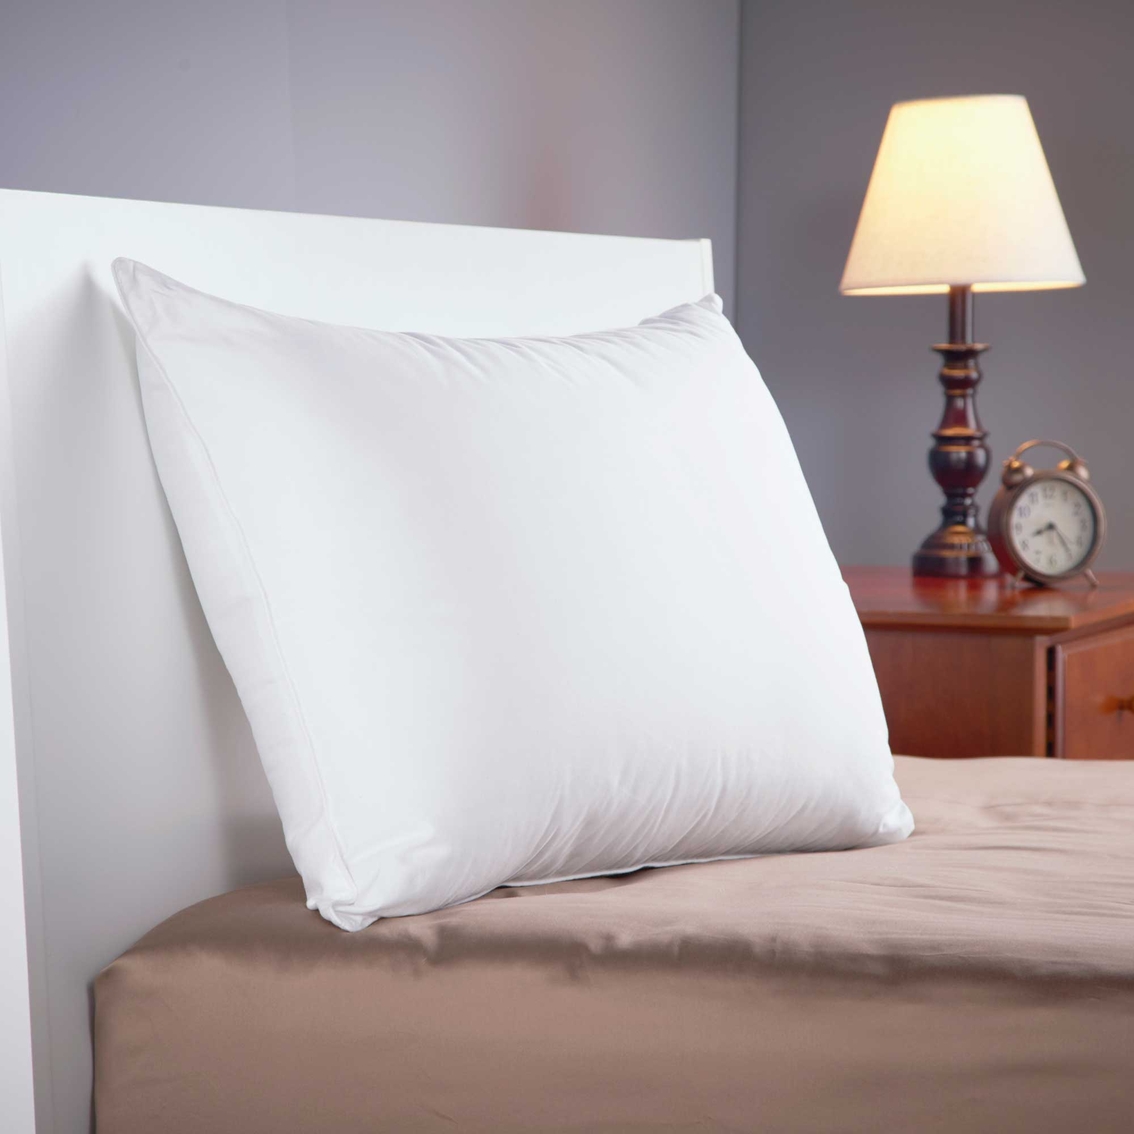 Sealy Refreshing Comfort Pillow - Image 4 of 4